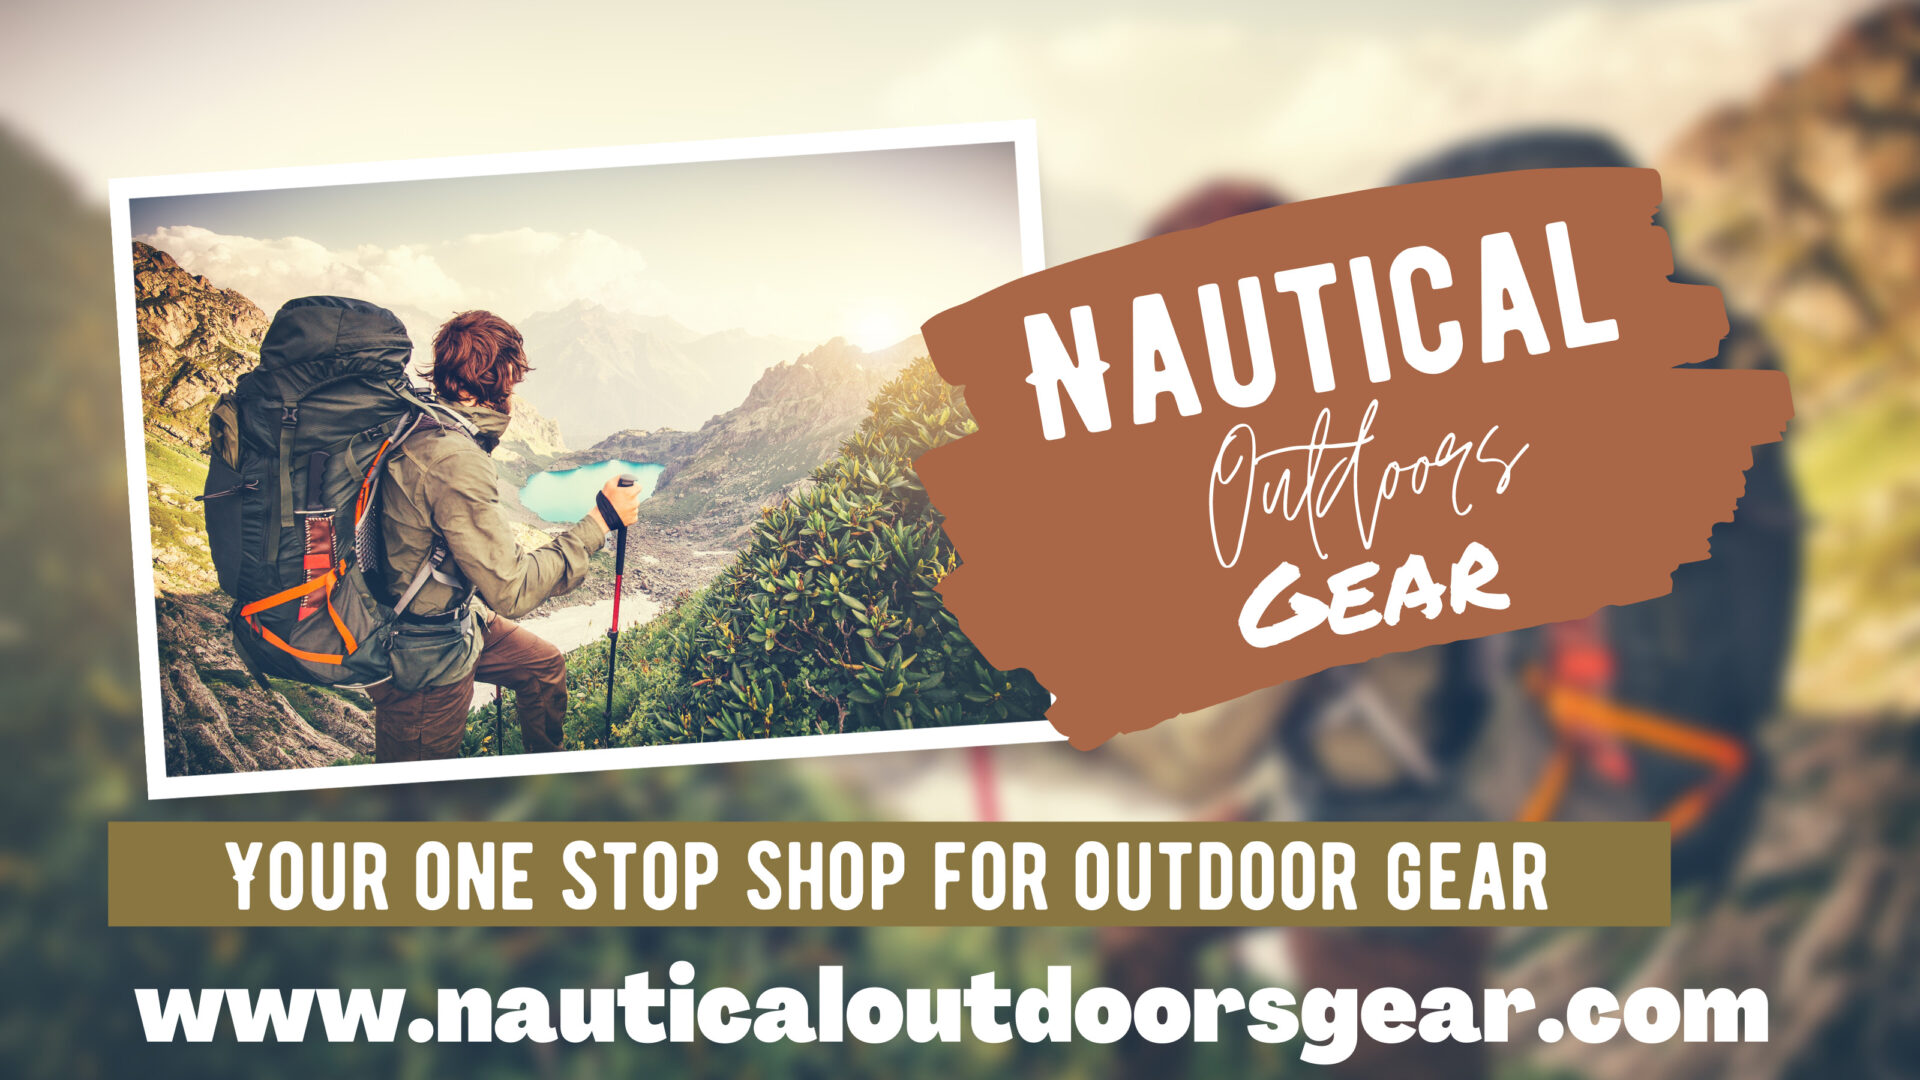 “Nautical Outdoors Seeks To Clothe Your Next Adventure”